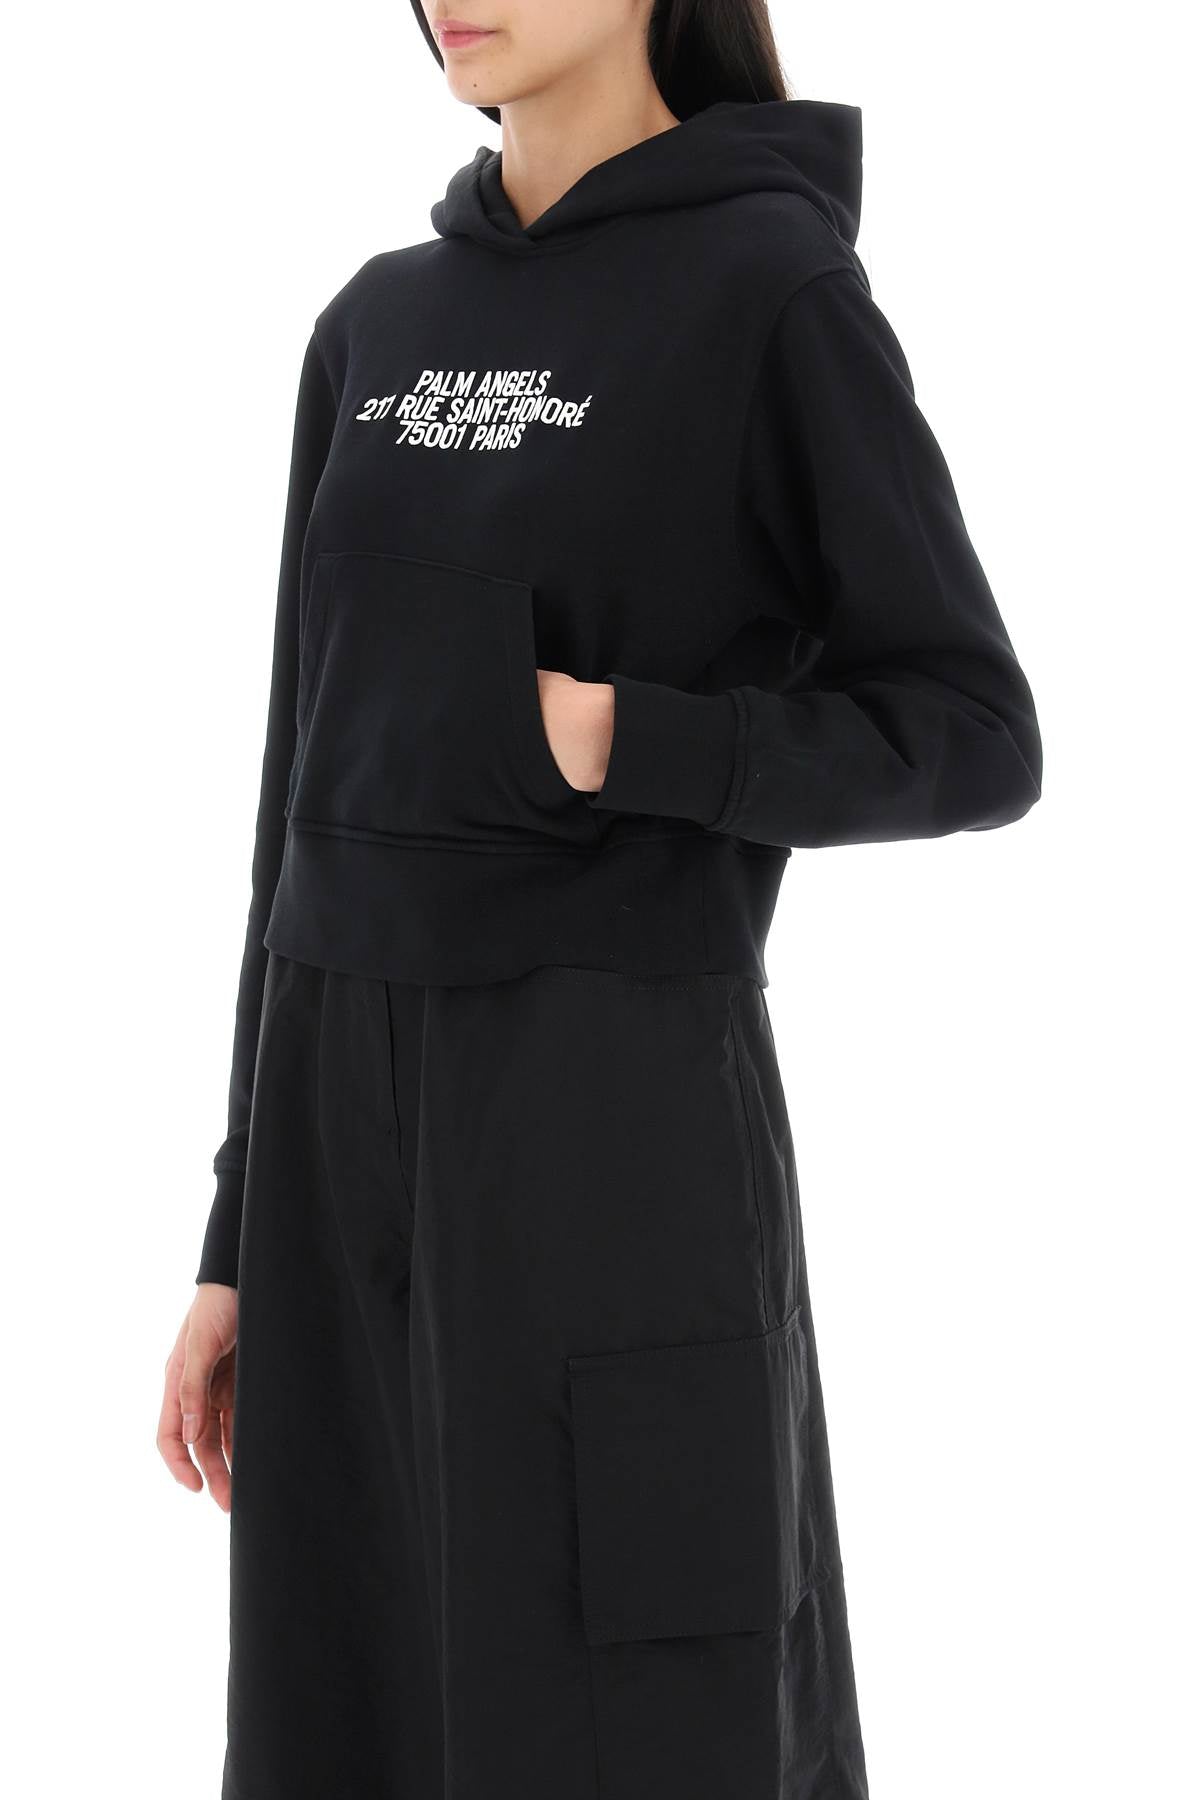 Palm Angels Cropped Hoodie With Embroidery Black